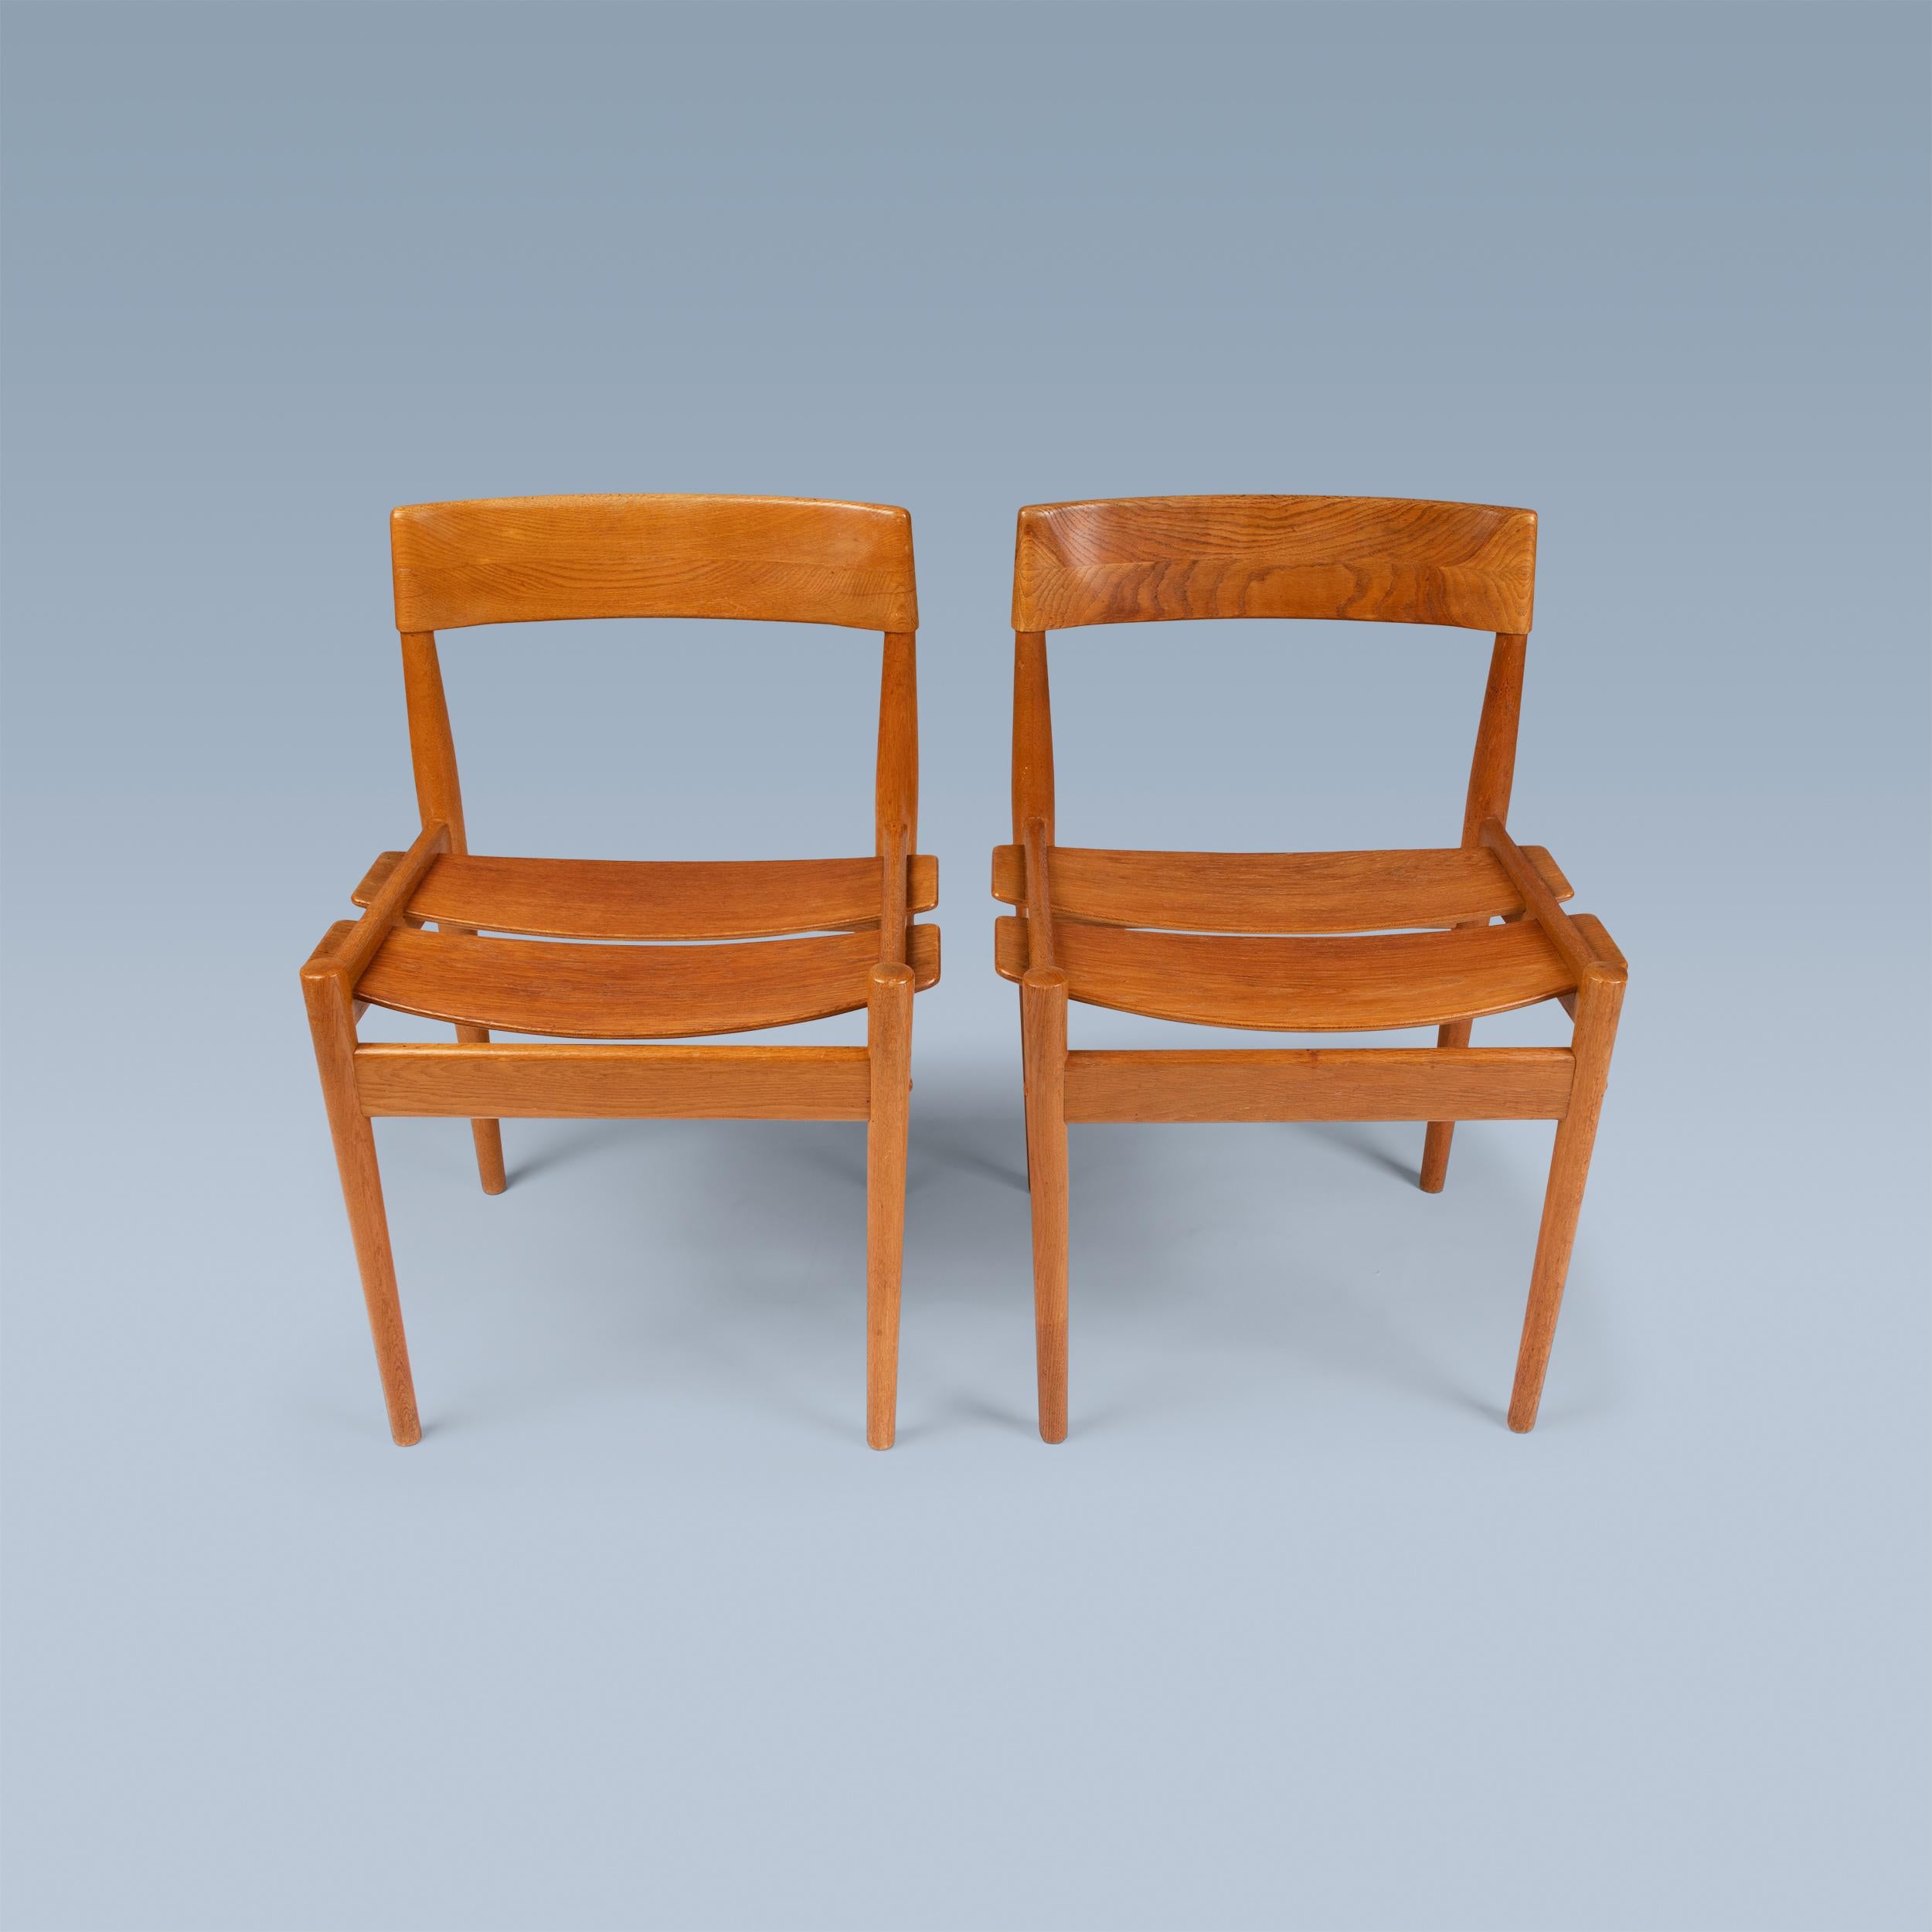 This rarely seen pair of side chairs (model 3-1) in slightly fumed oak was
designed ca. 1956 by Danish designer Grete Jalk (1920-2006). These examples were executed by Poul Jeppesen, Denmark in the late 1950s. 

One chair labelled P. Jeppesen